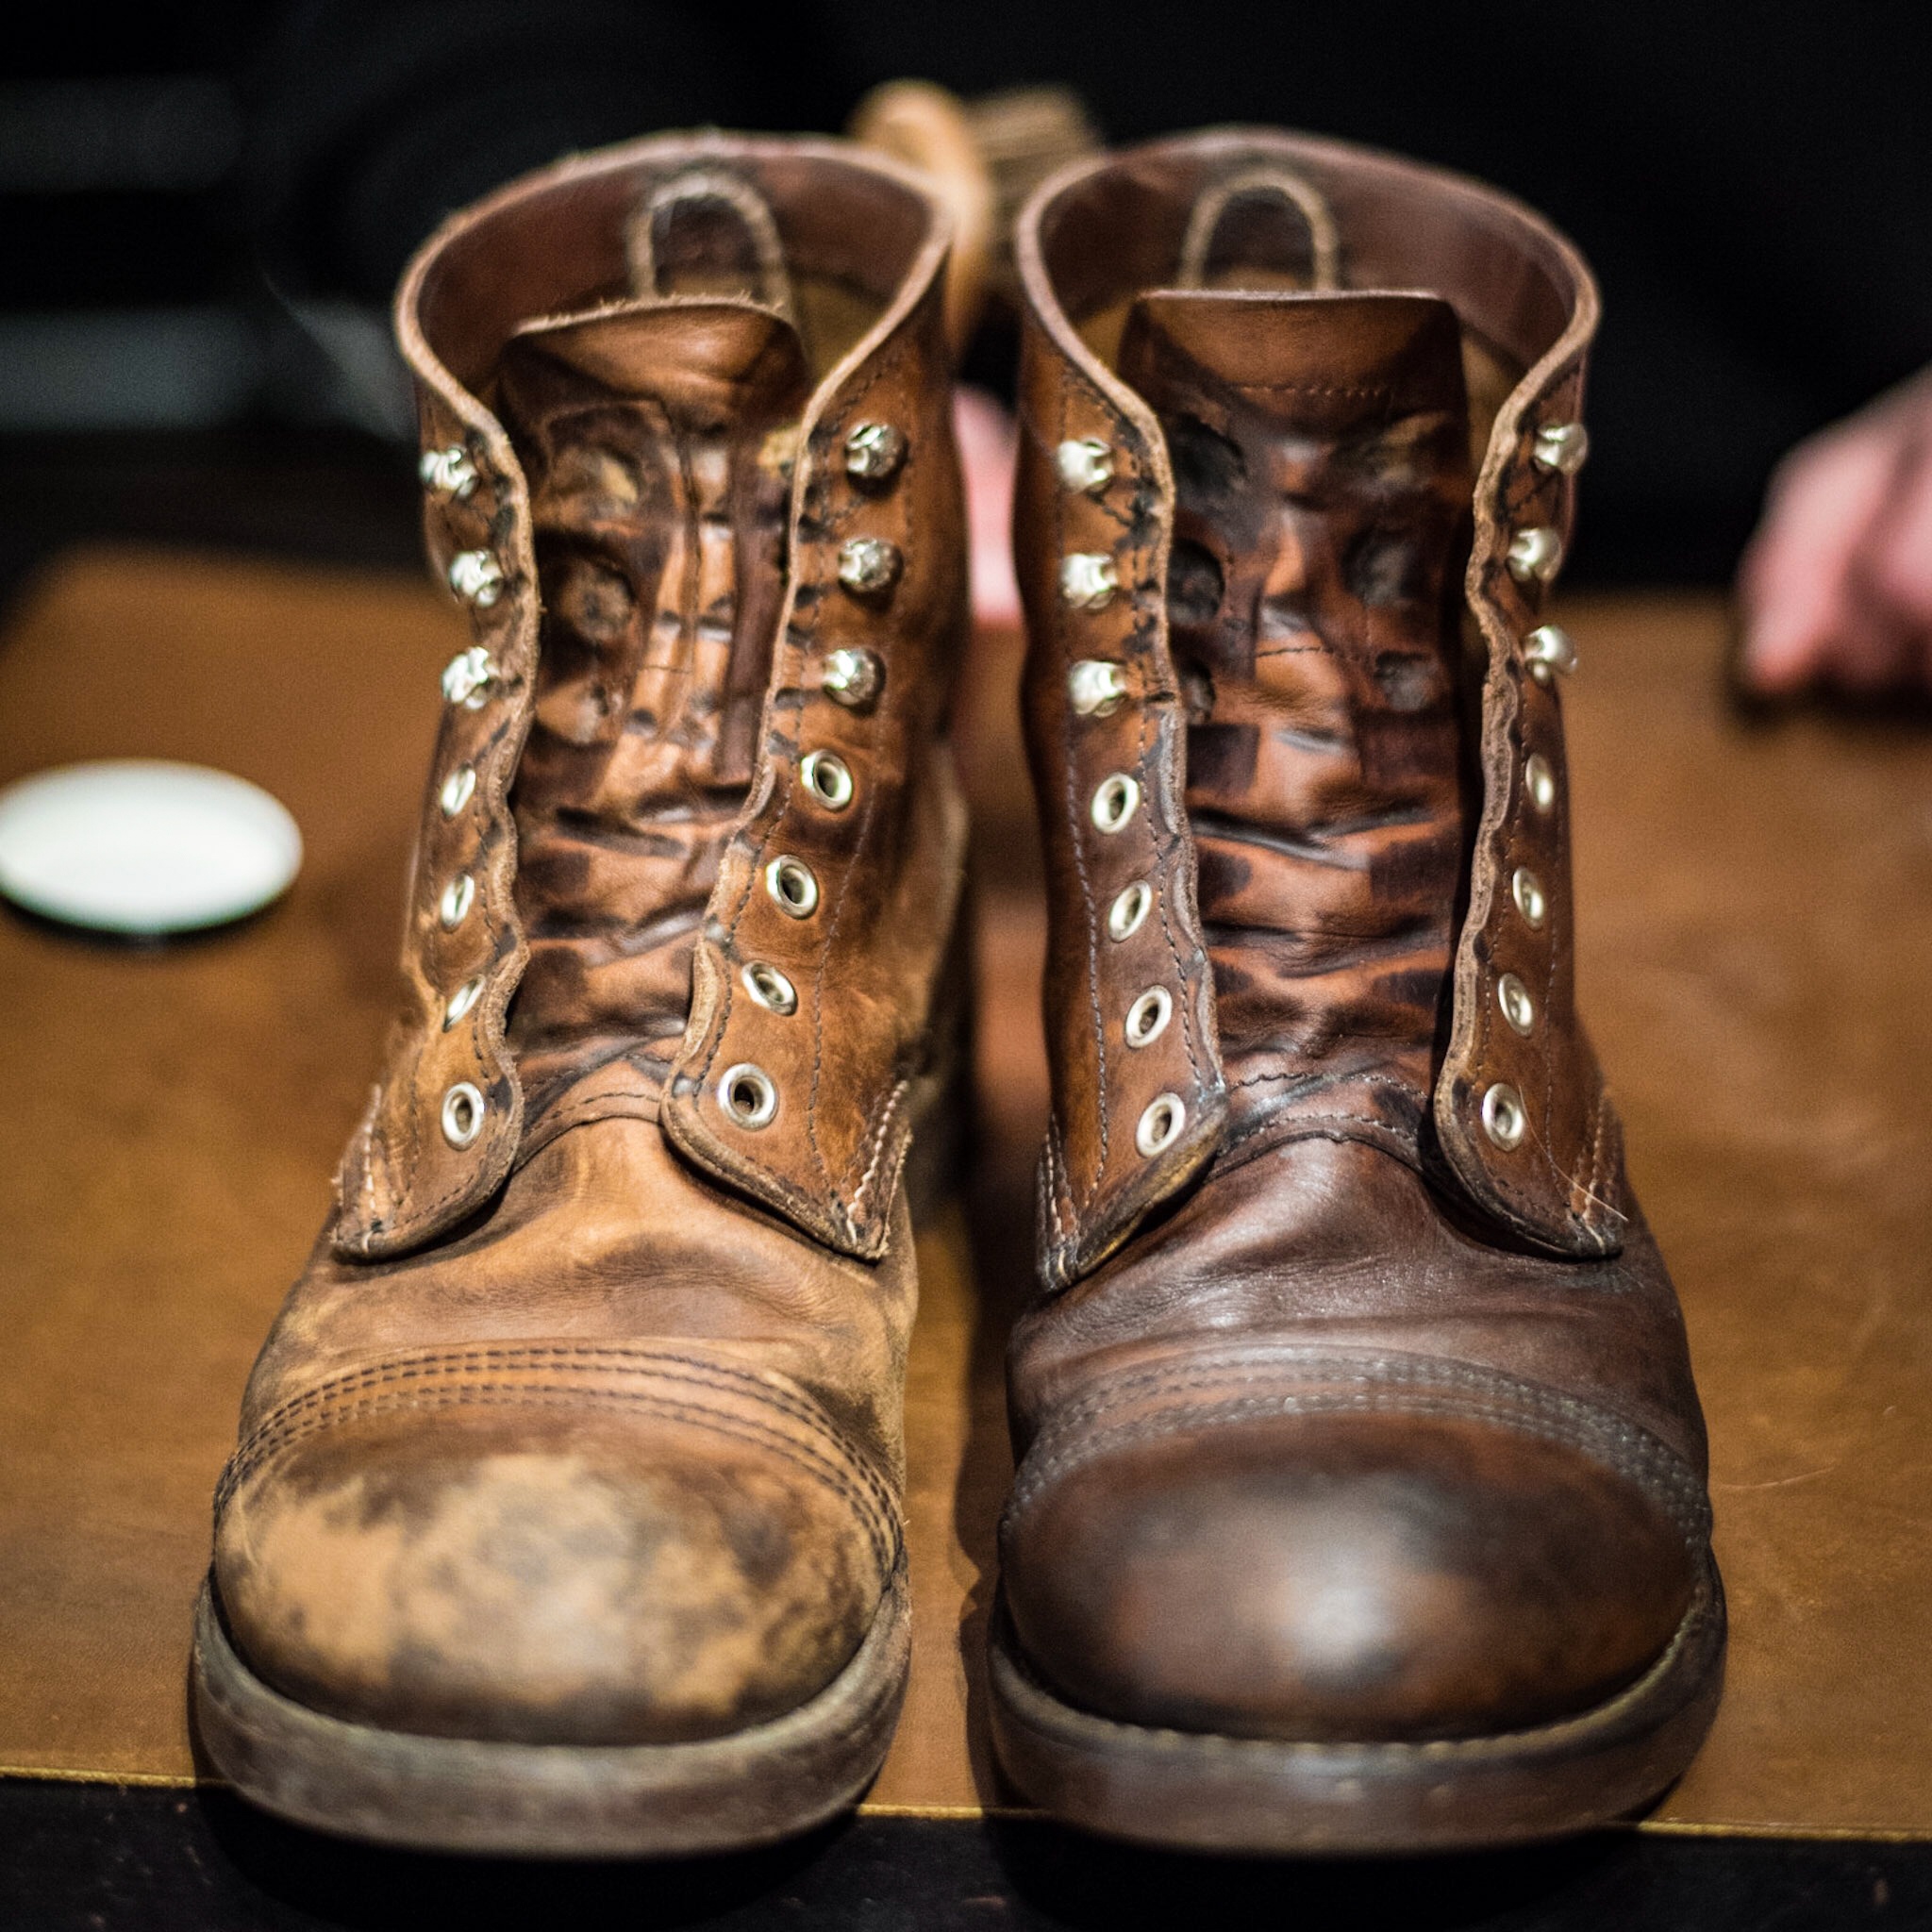 Take Care! | Journal | Red Wing Shoes 